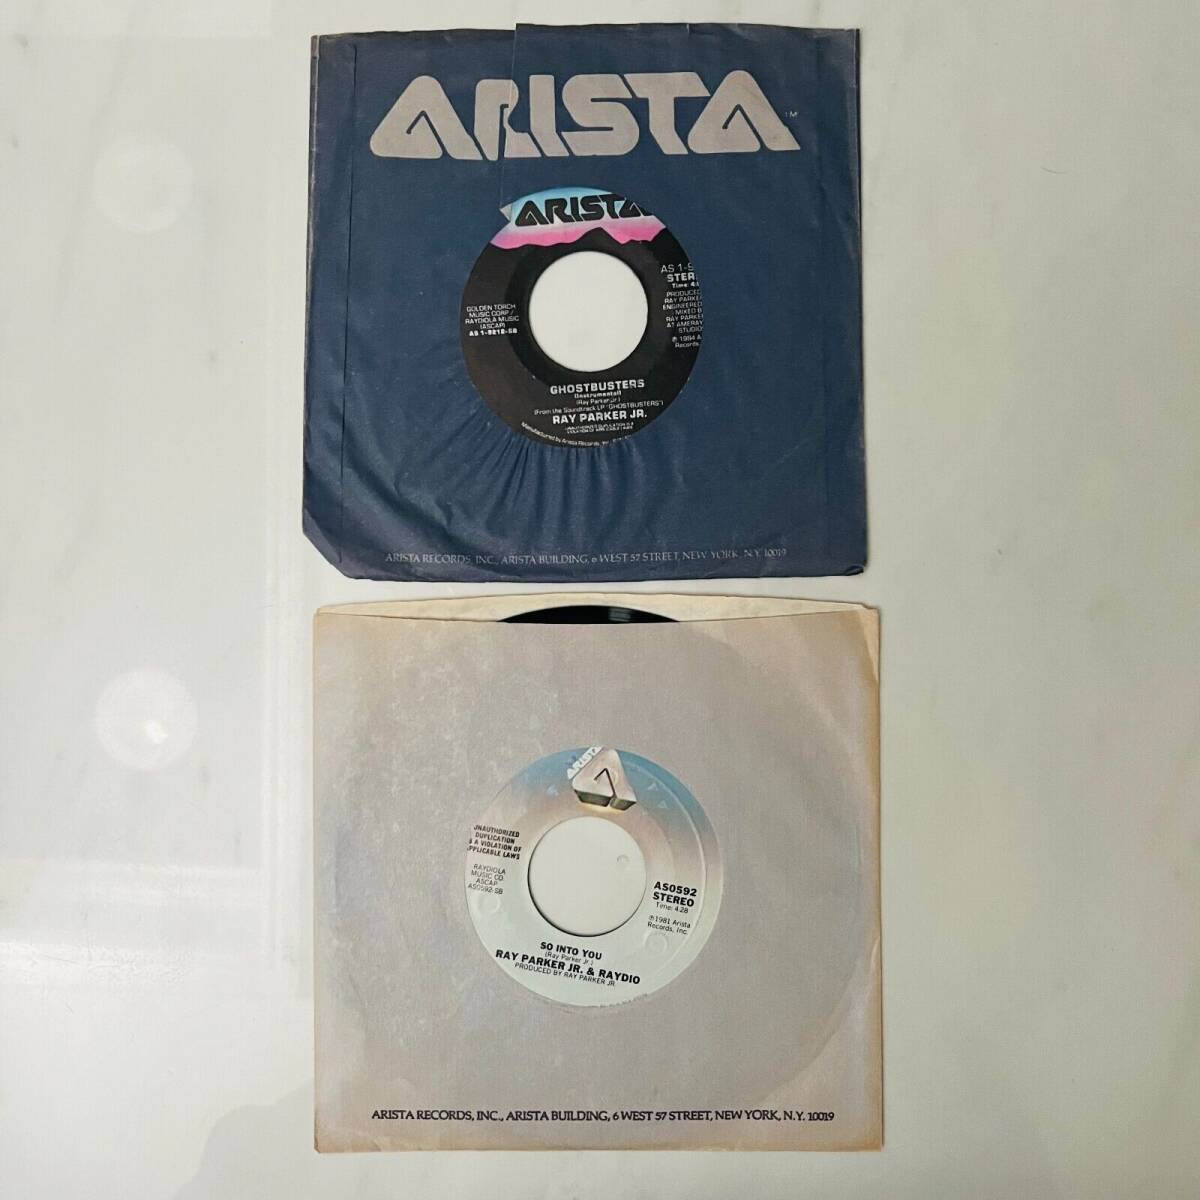 Ray Parker Jr. - Lot of 2 - Single 7" 45rpm Records - Ghostbusters - So Into You 海外 即決_Ray Parker Jr. - L 3